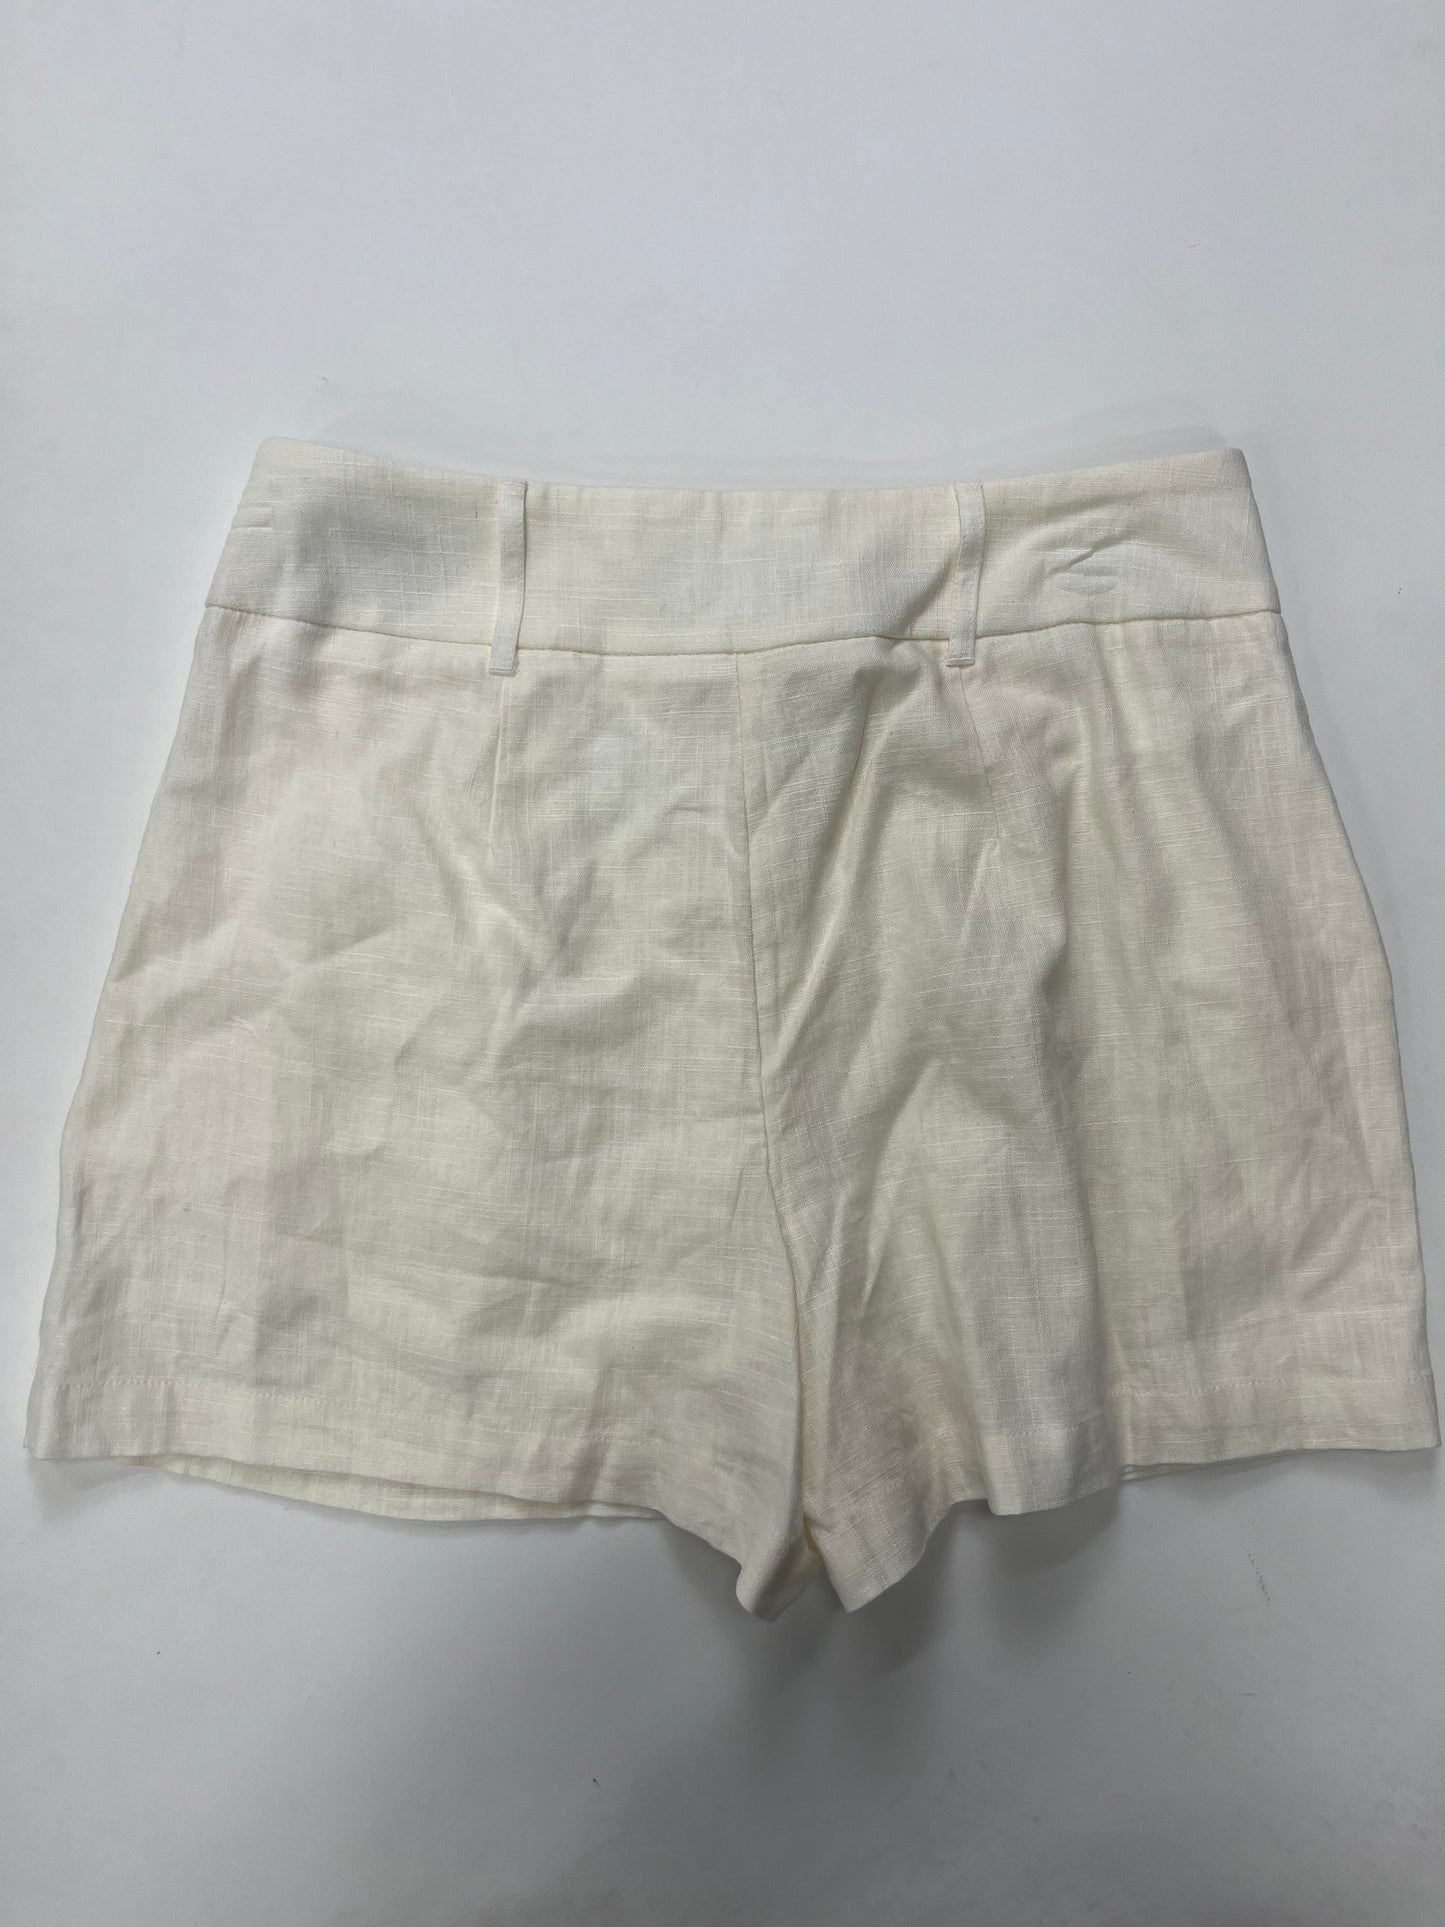 Shorts By Express NWT Size: 8